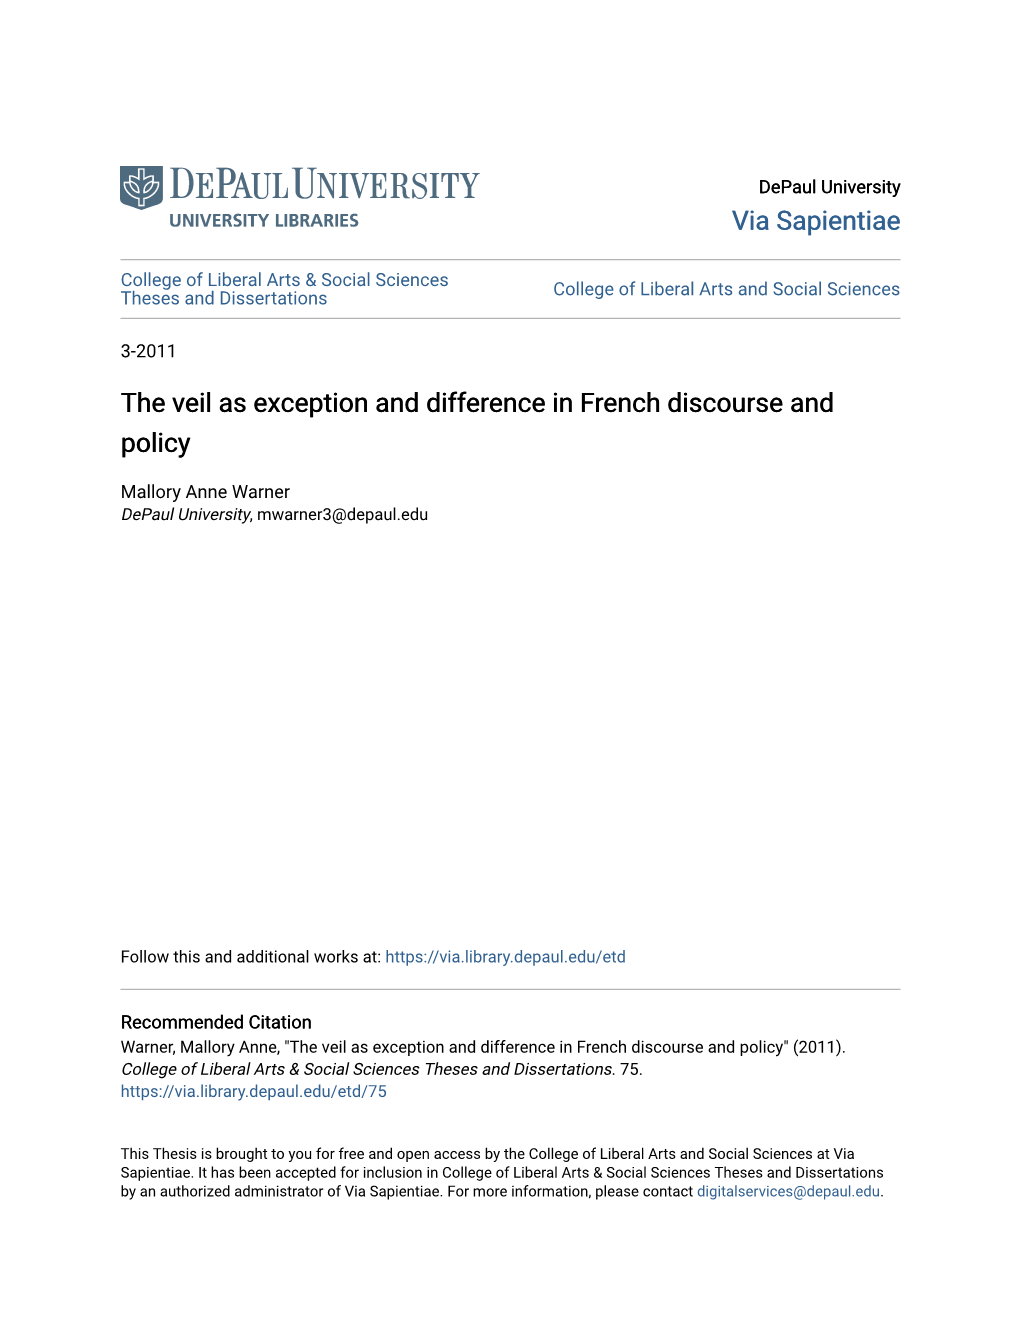 The Veil As Exception and Difference in French Discourse and Policy